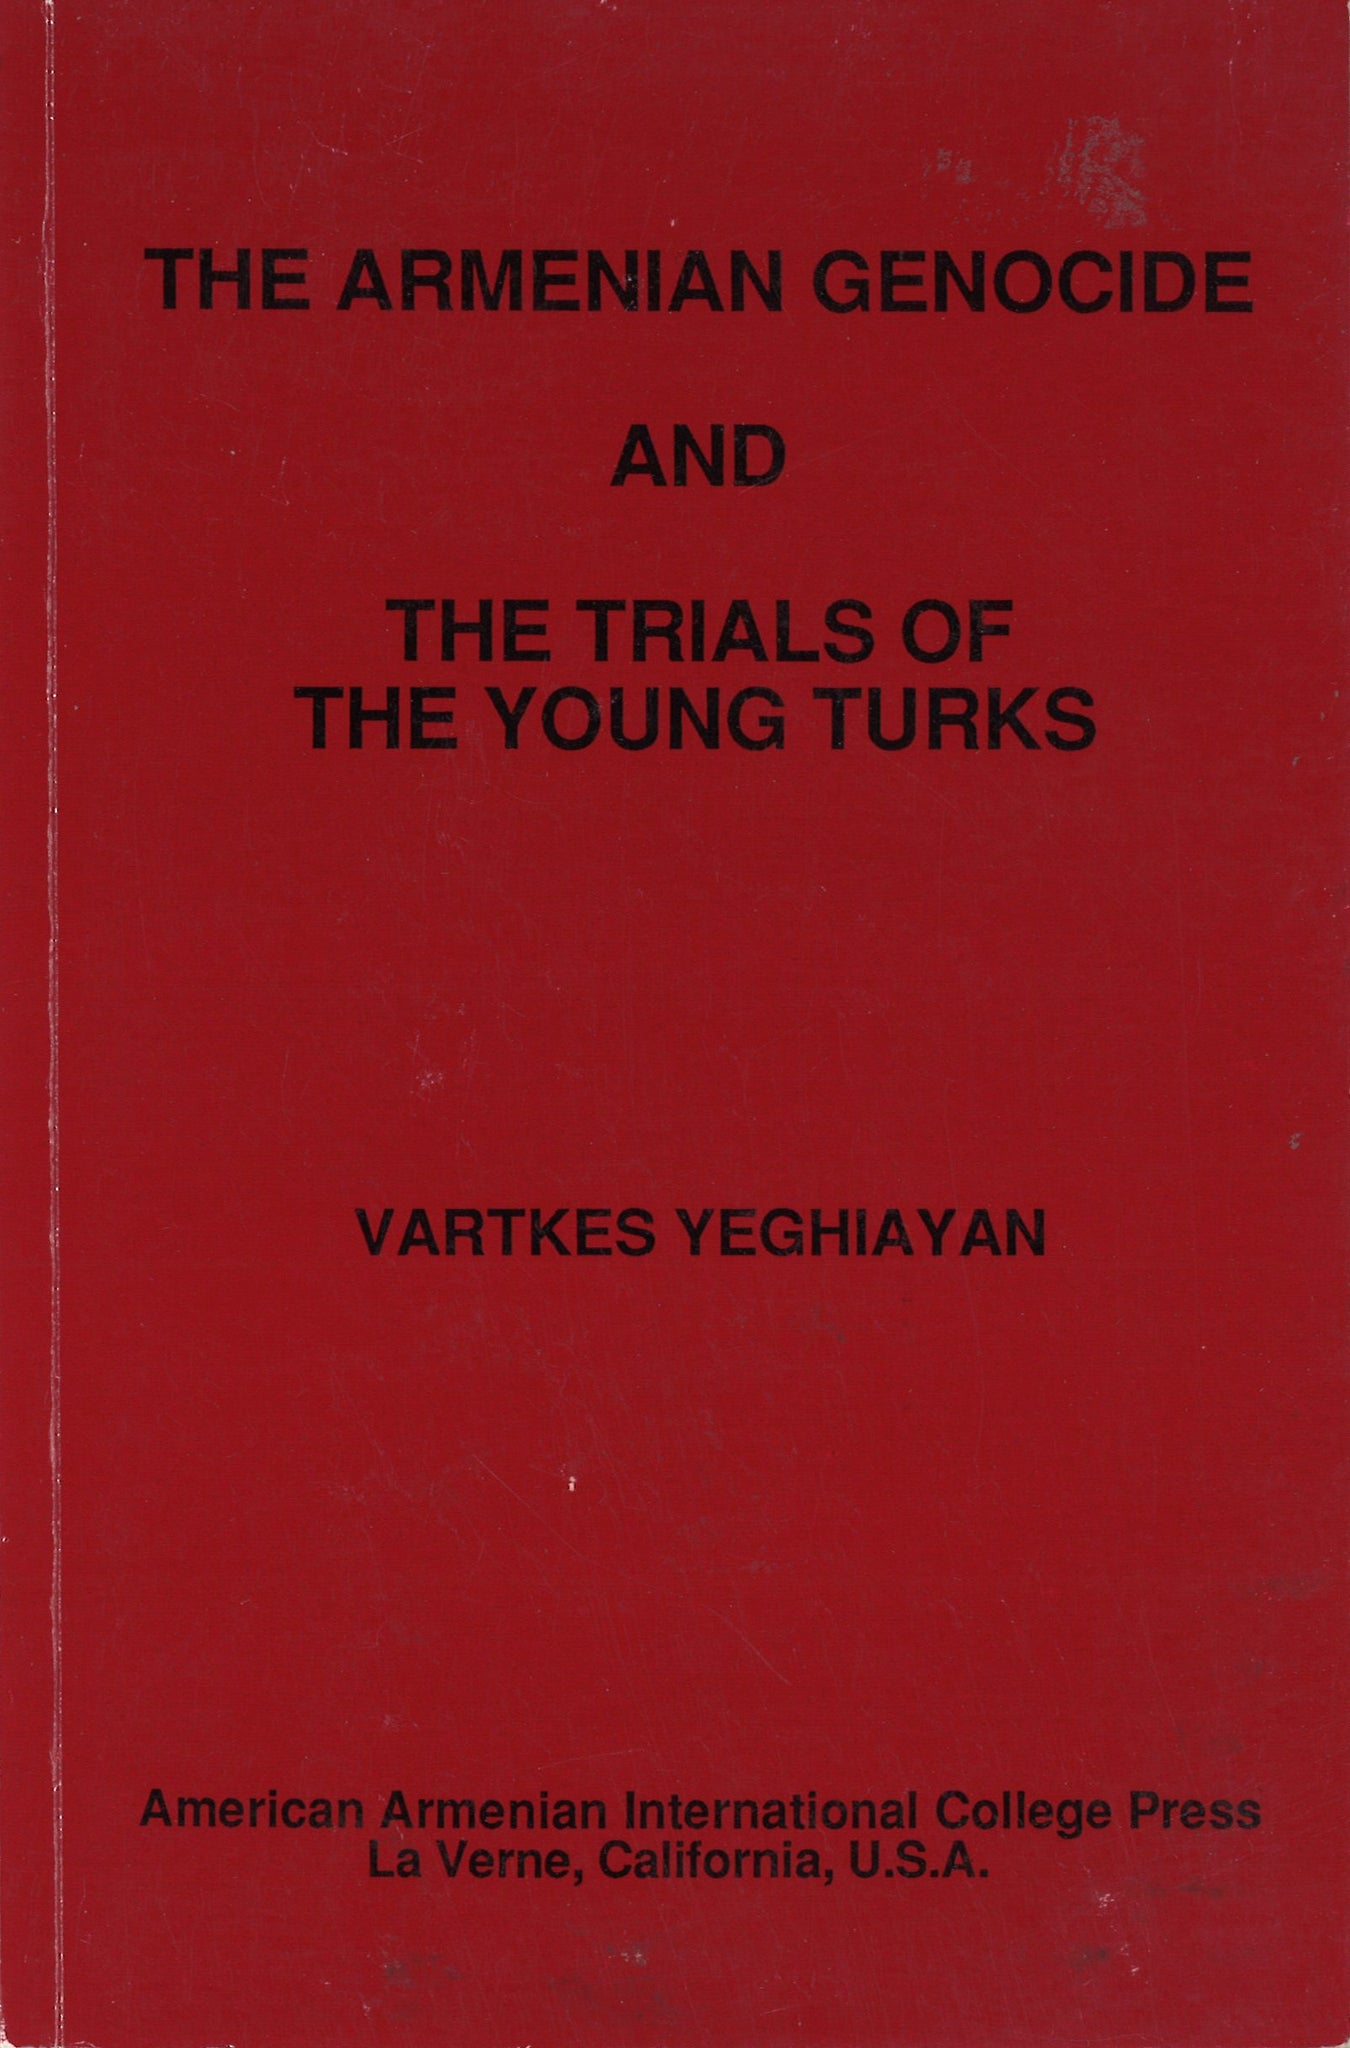 ARMENIAN GENOCIDE AND THE TRIALS OF THE YOUNG TURKS